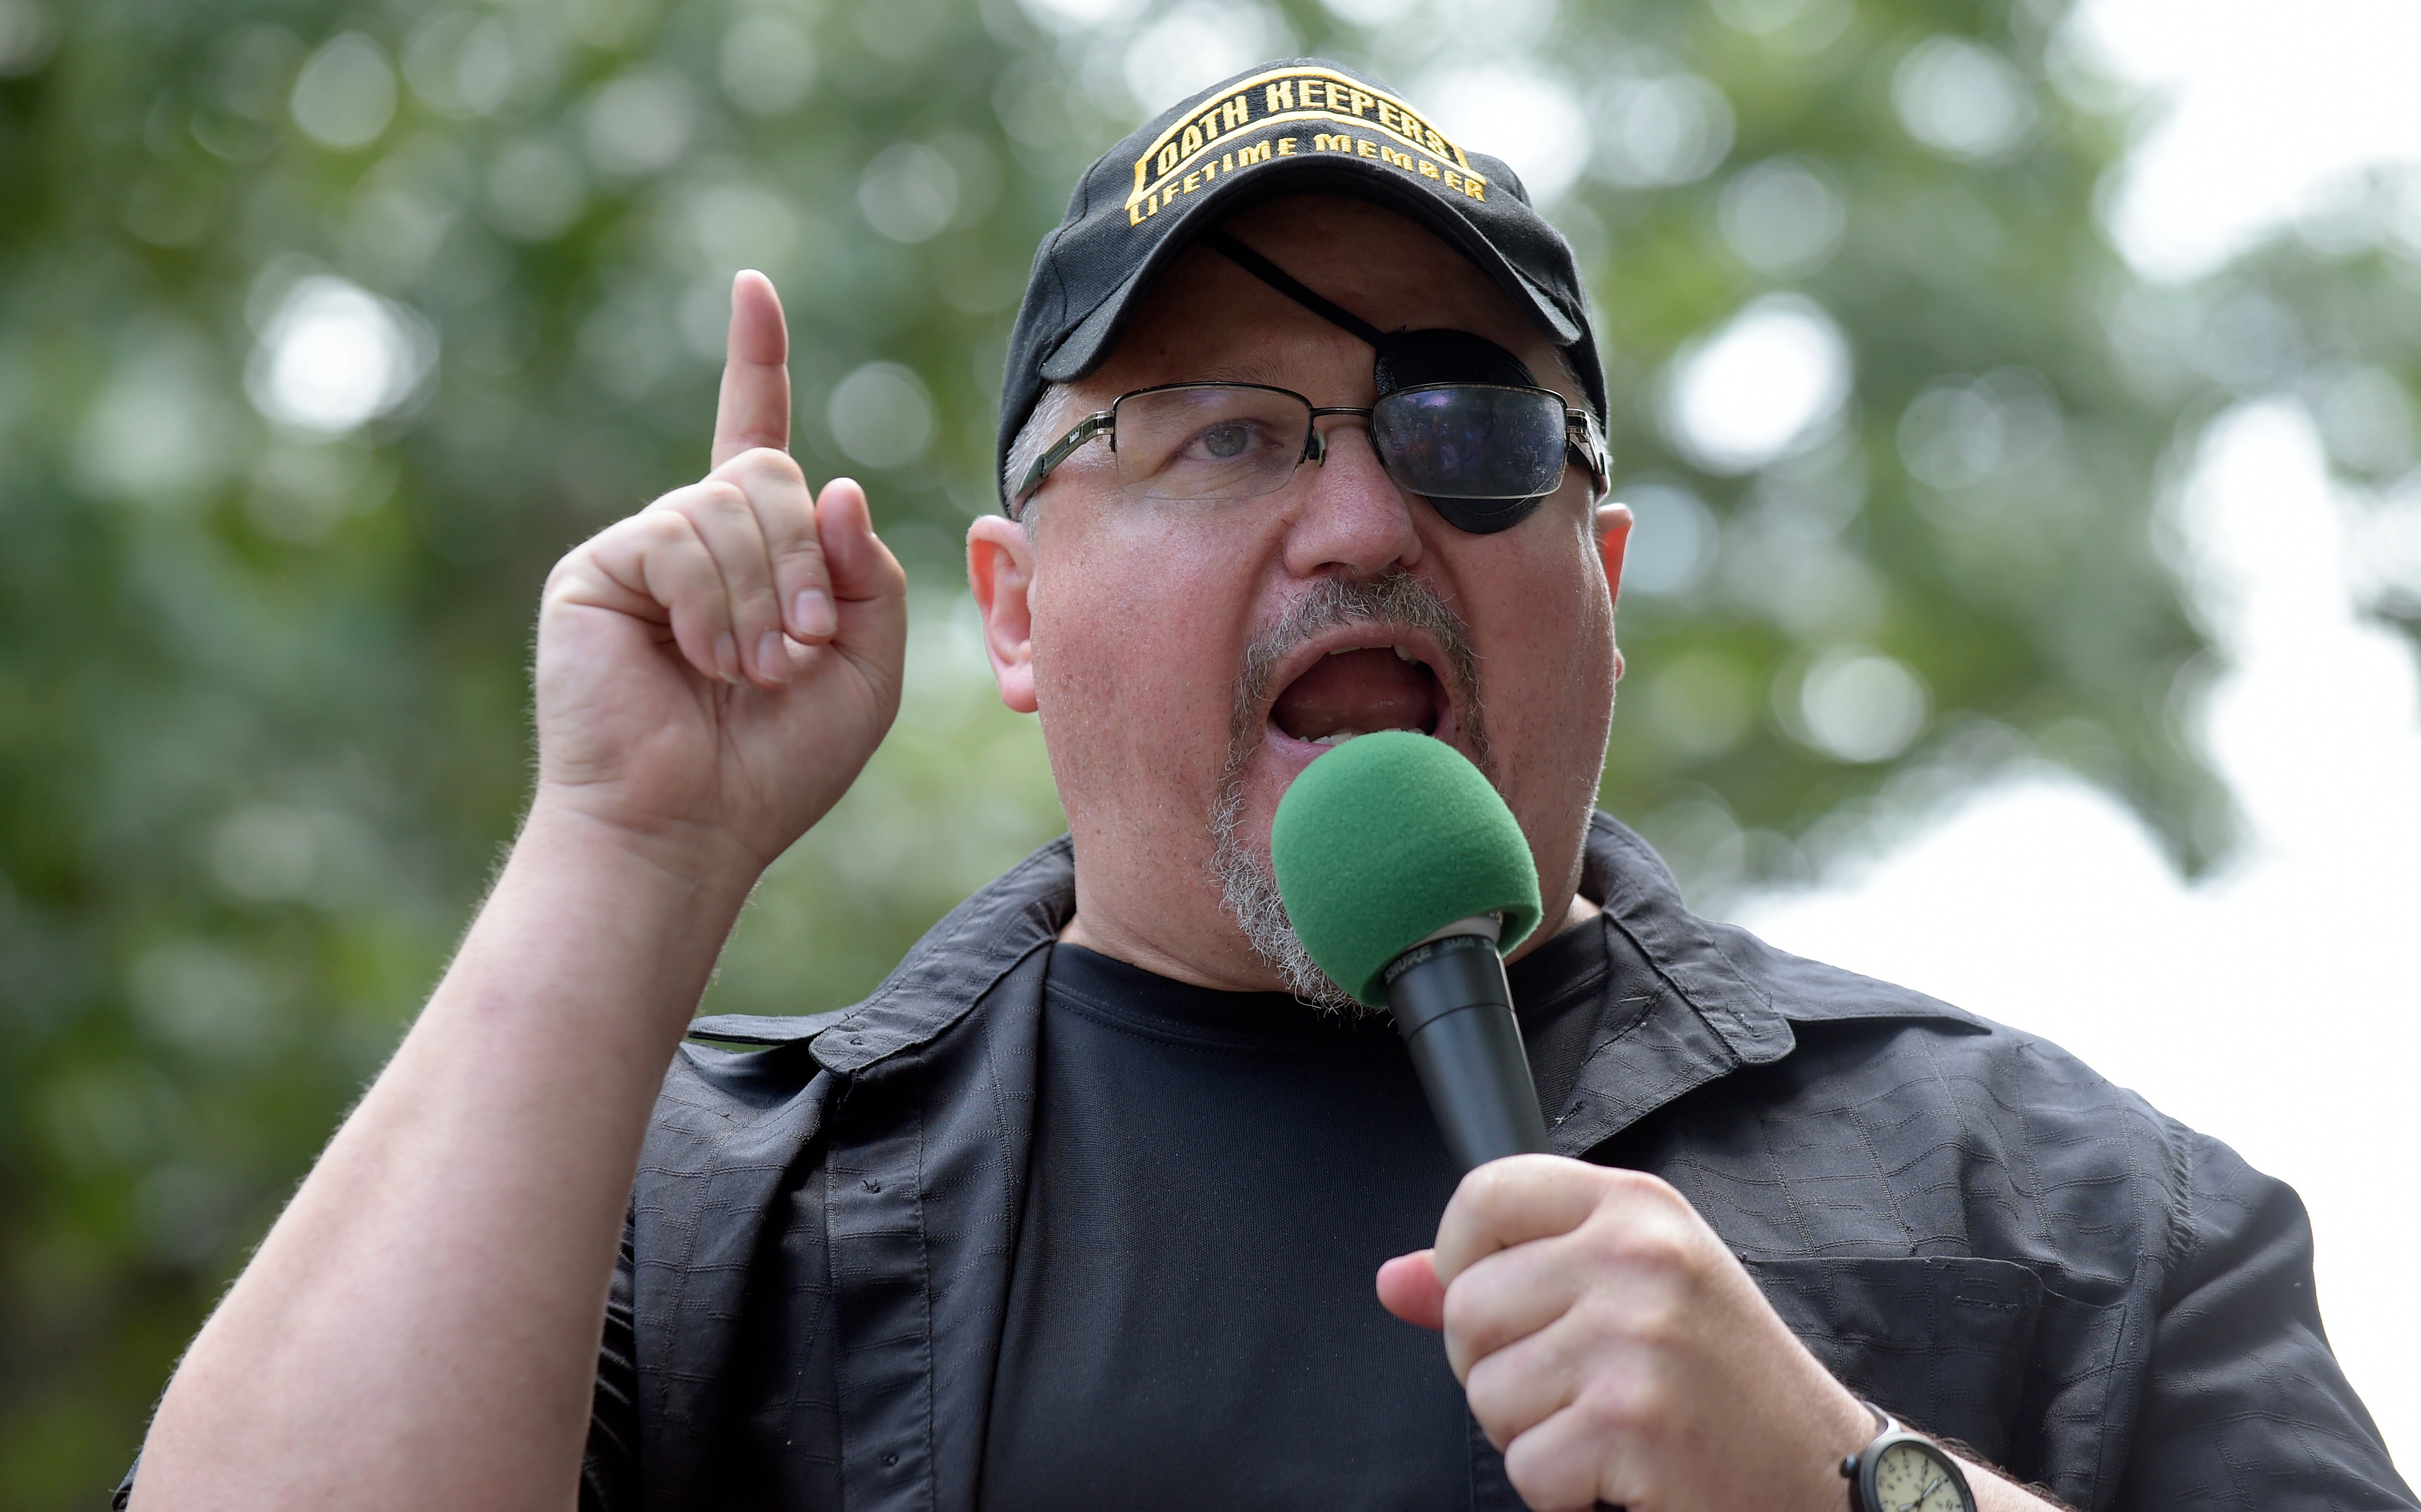 Stewart Rhodes, founder of the Oath Keepers, speaks during a rally outside the White House in Washington. Rhodes has been arrested and charged with seditious conspiracy in the Jan. 6 attack on the U.S. Capitol. The Justice Department announced the charges against Rhodes on Thursday.